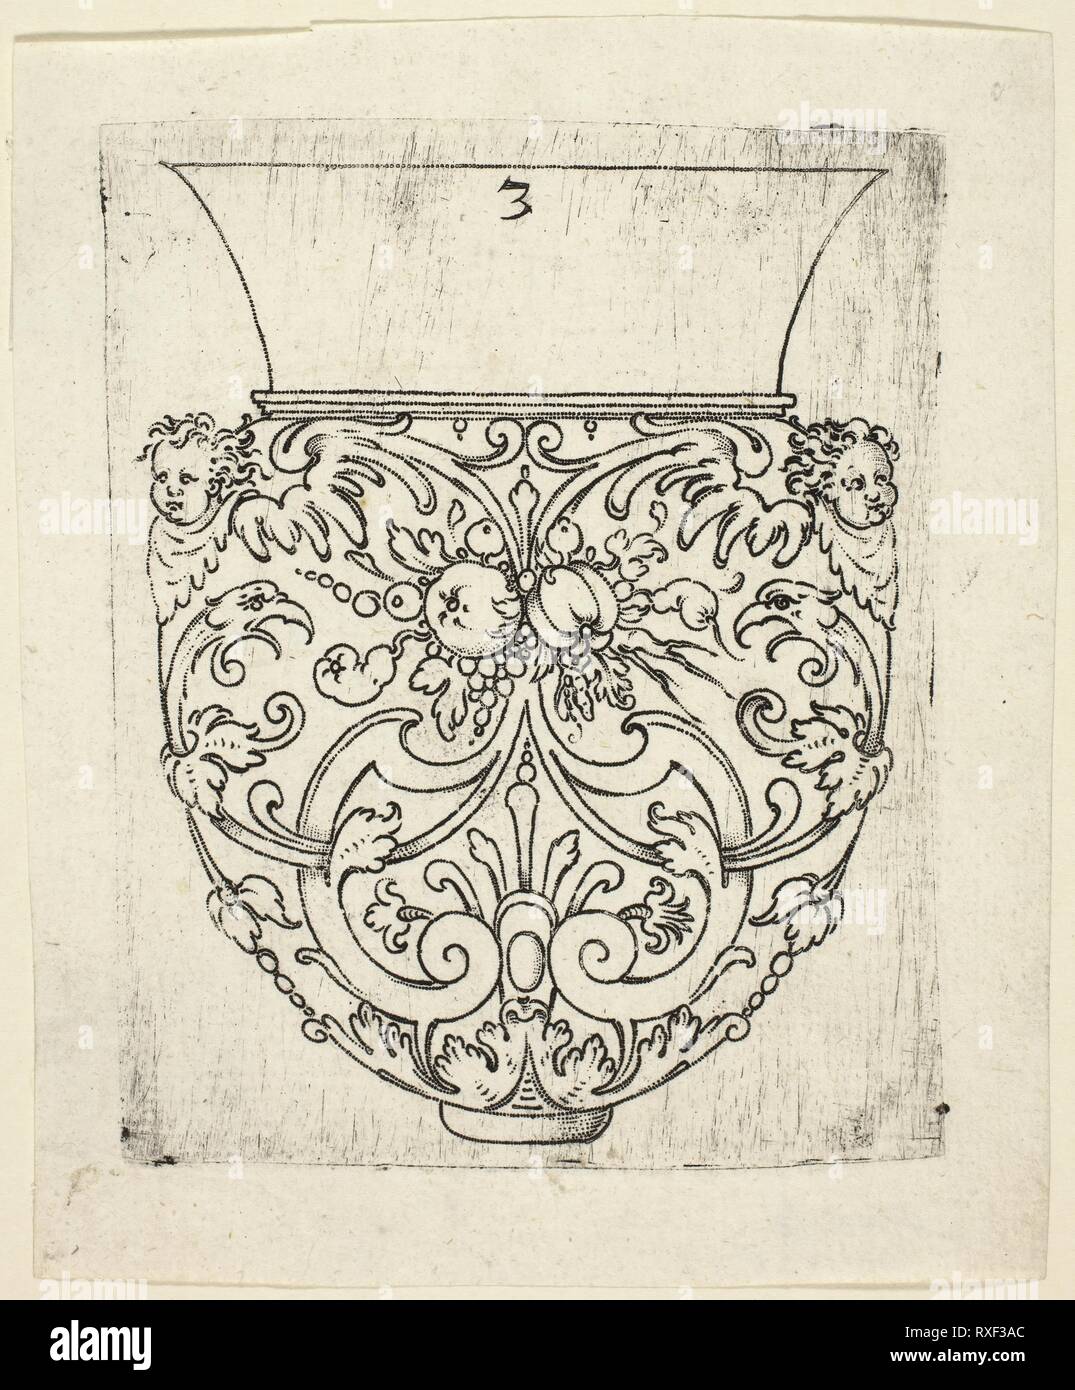 Plate 3, from twenty ornamental designs for goblets and beakers. Master A.P.; German, active early 17th century. Date: 1604. Dimensions: 120 x 95 mm (image/plate); 145 x 120 mm (sheet). Punch engraving in black on ivory laid paper. Origin: Germany. Museum: The Chicago Art Institute. Stock Photo